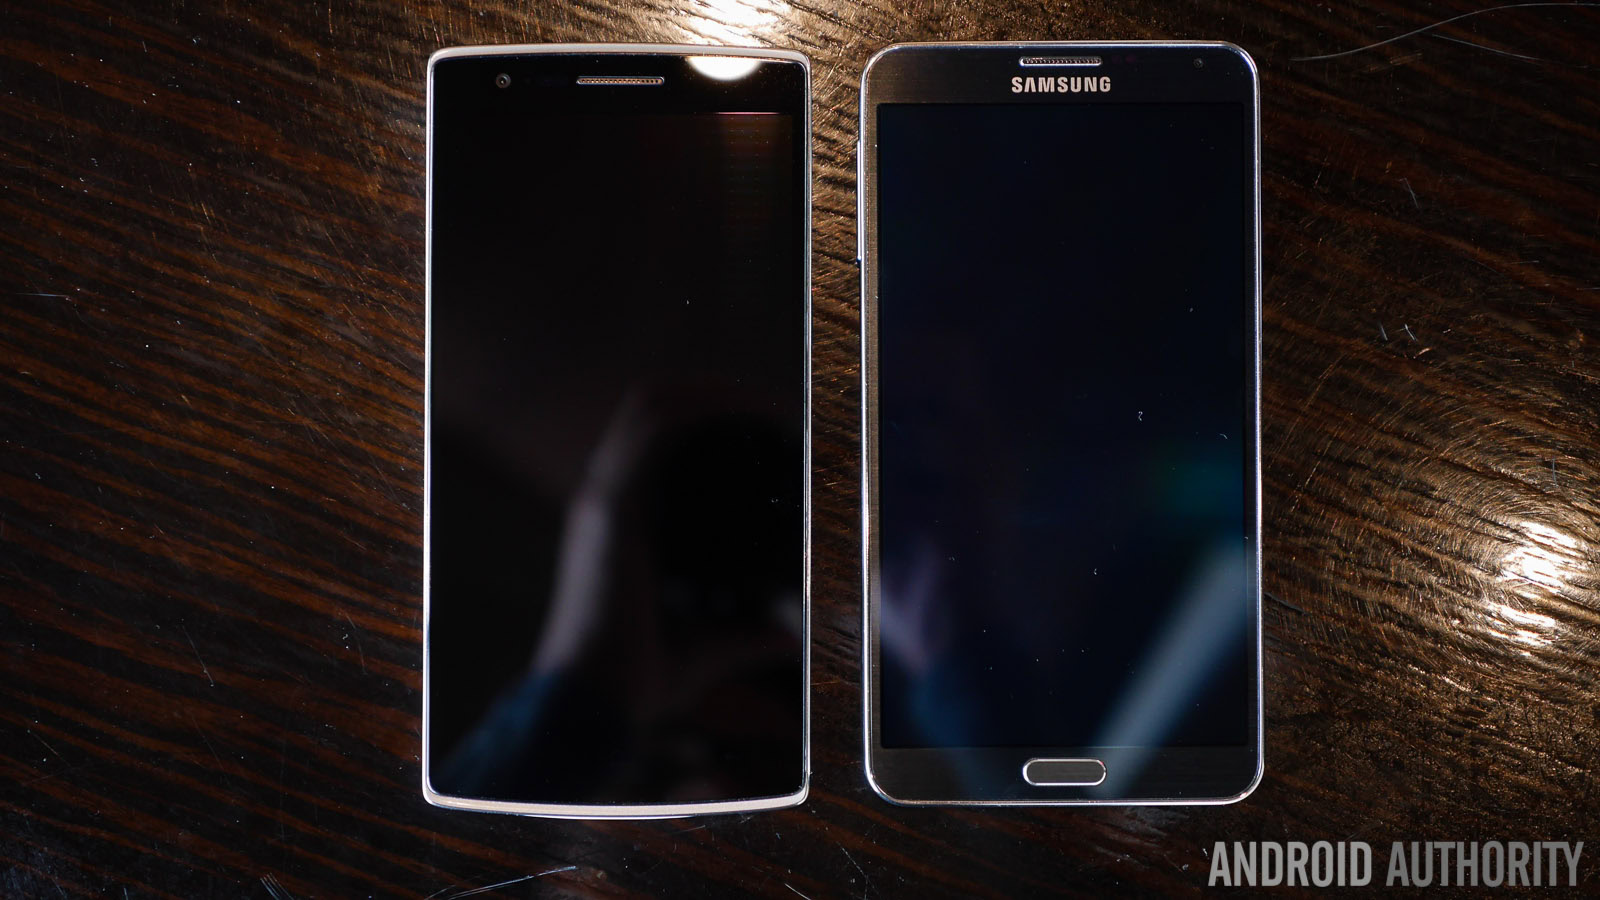 oneplus one vs galaxy note 3 aa (1 of 17)